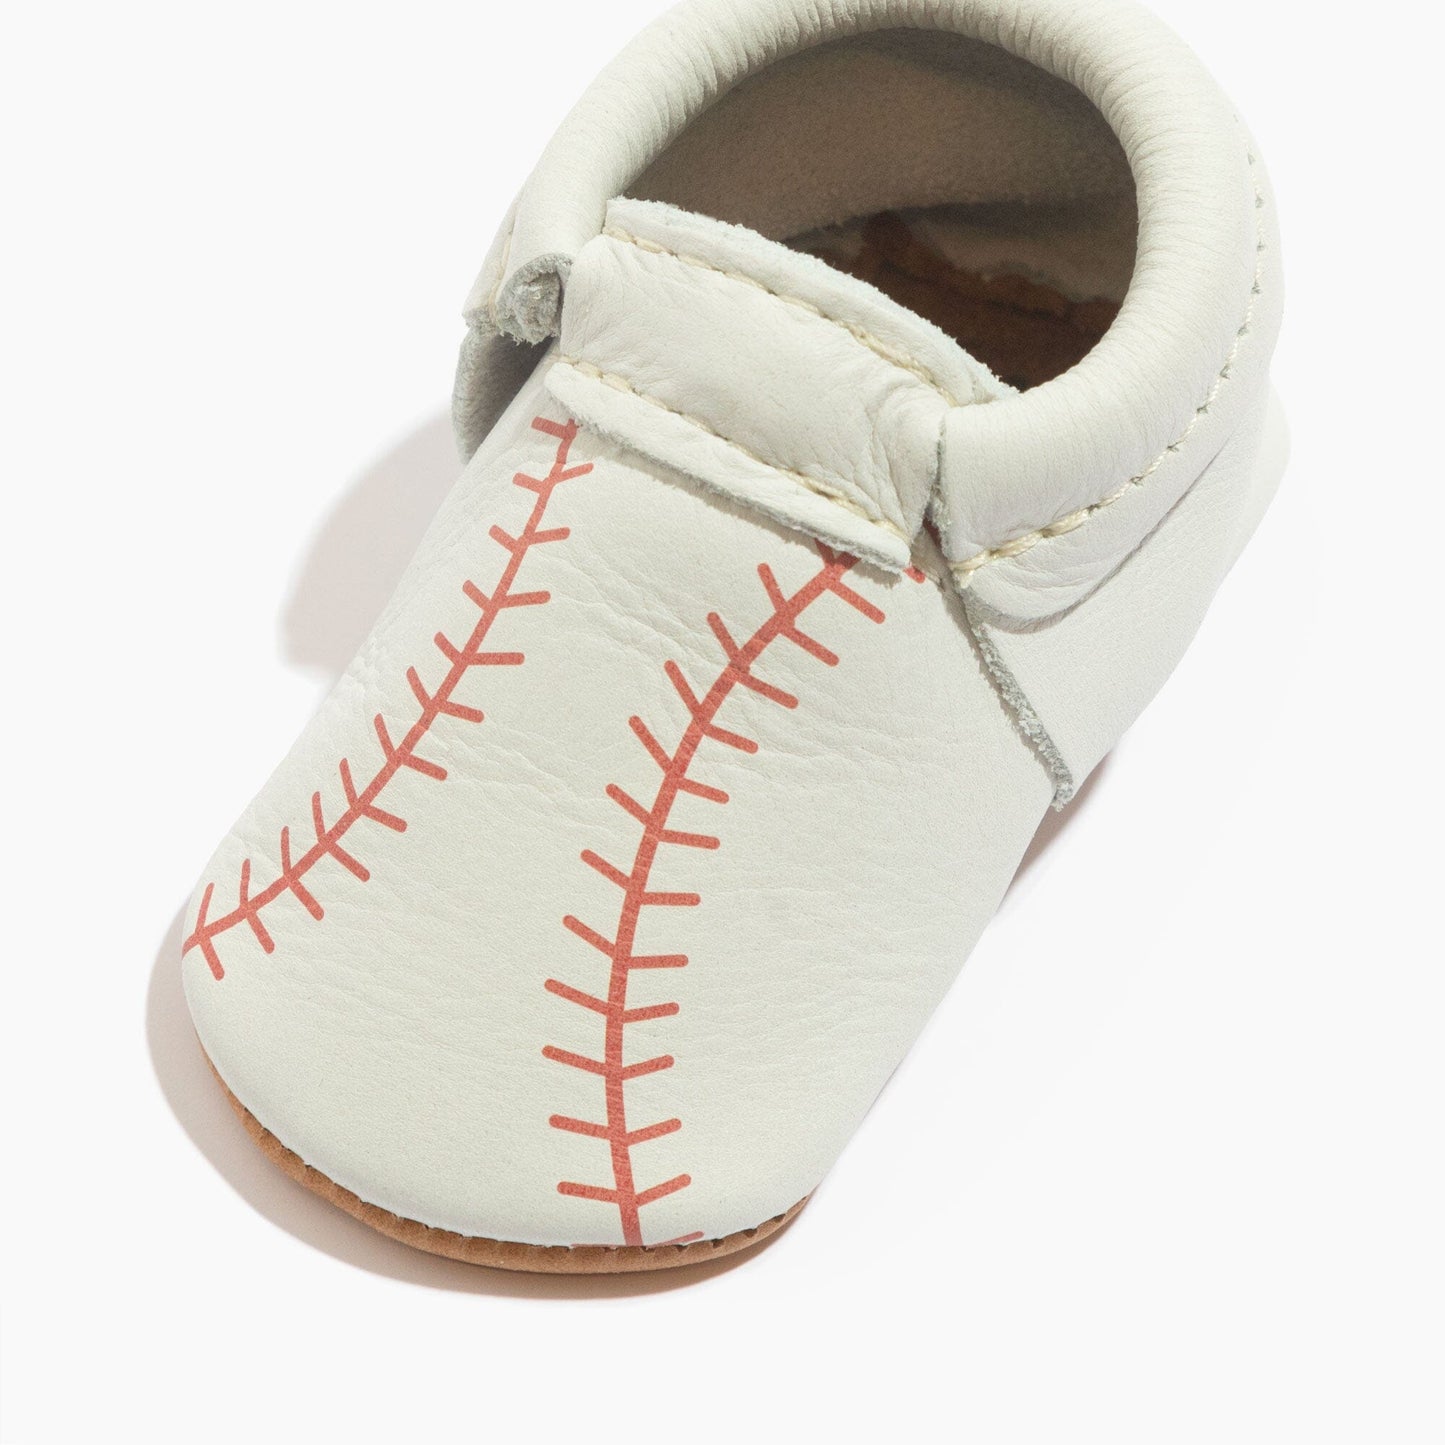 First Pitch City Baby Shoe City Mocc Soft Sole 